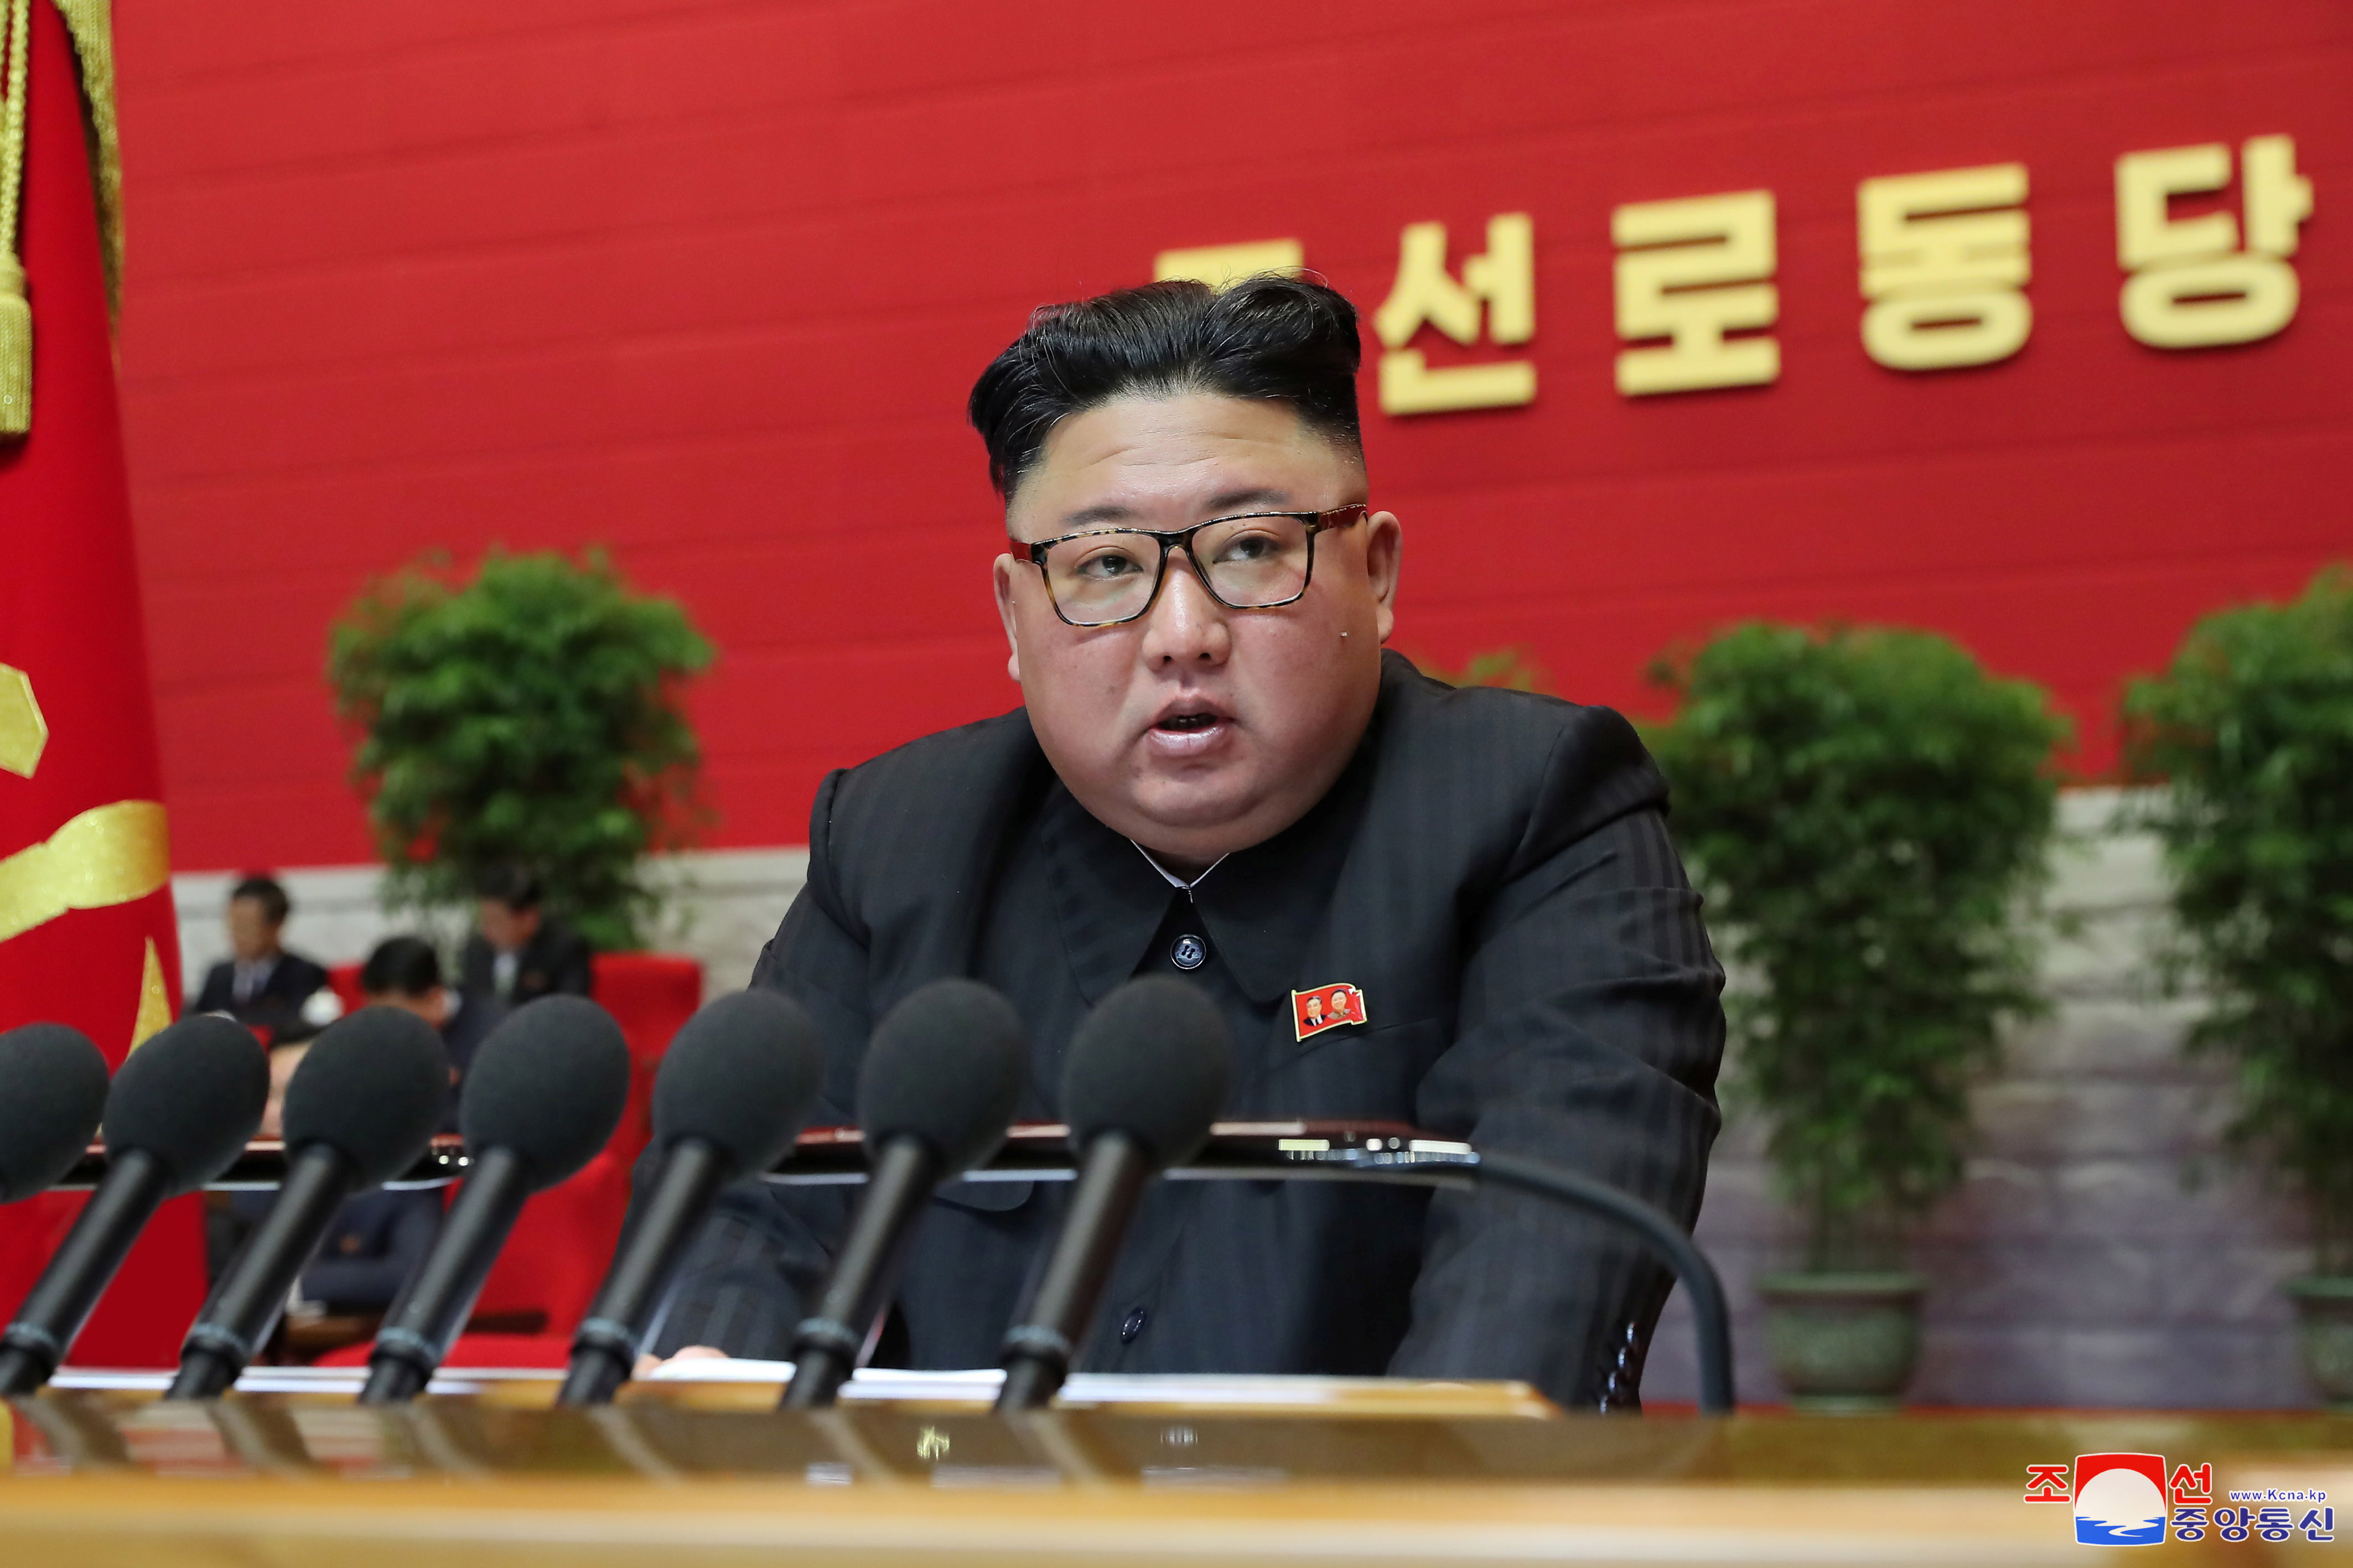 North Korean leader Kim Jong Un speaks during the 8th Congress of the Workers' Party in Pyongyang